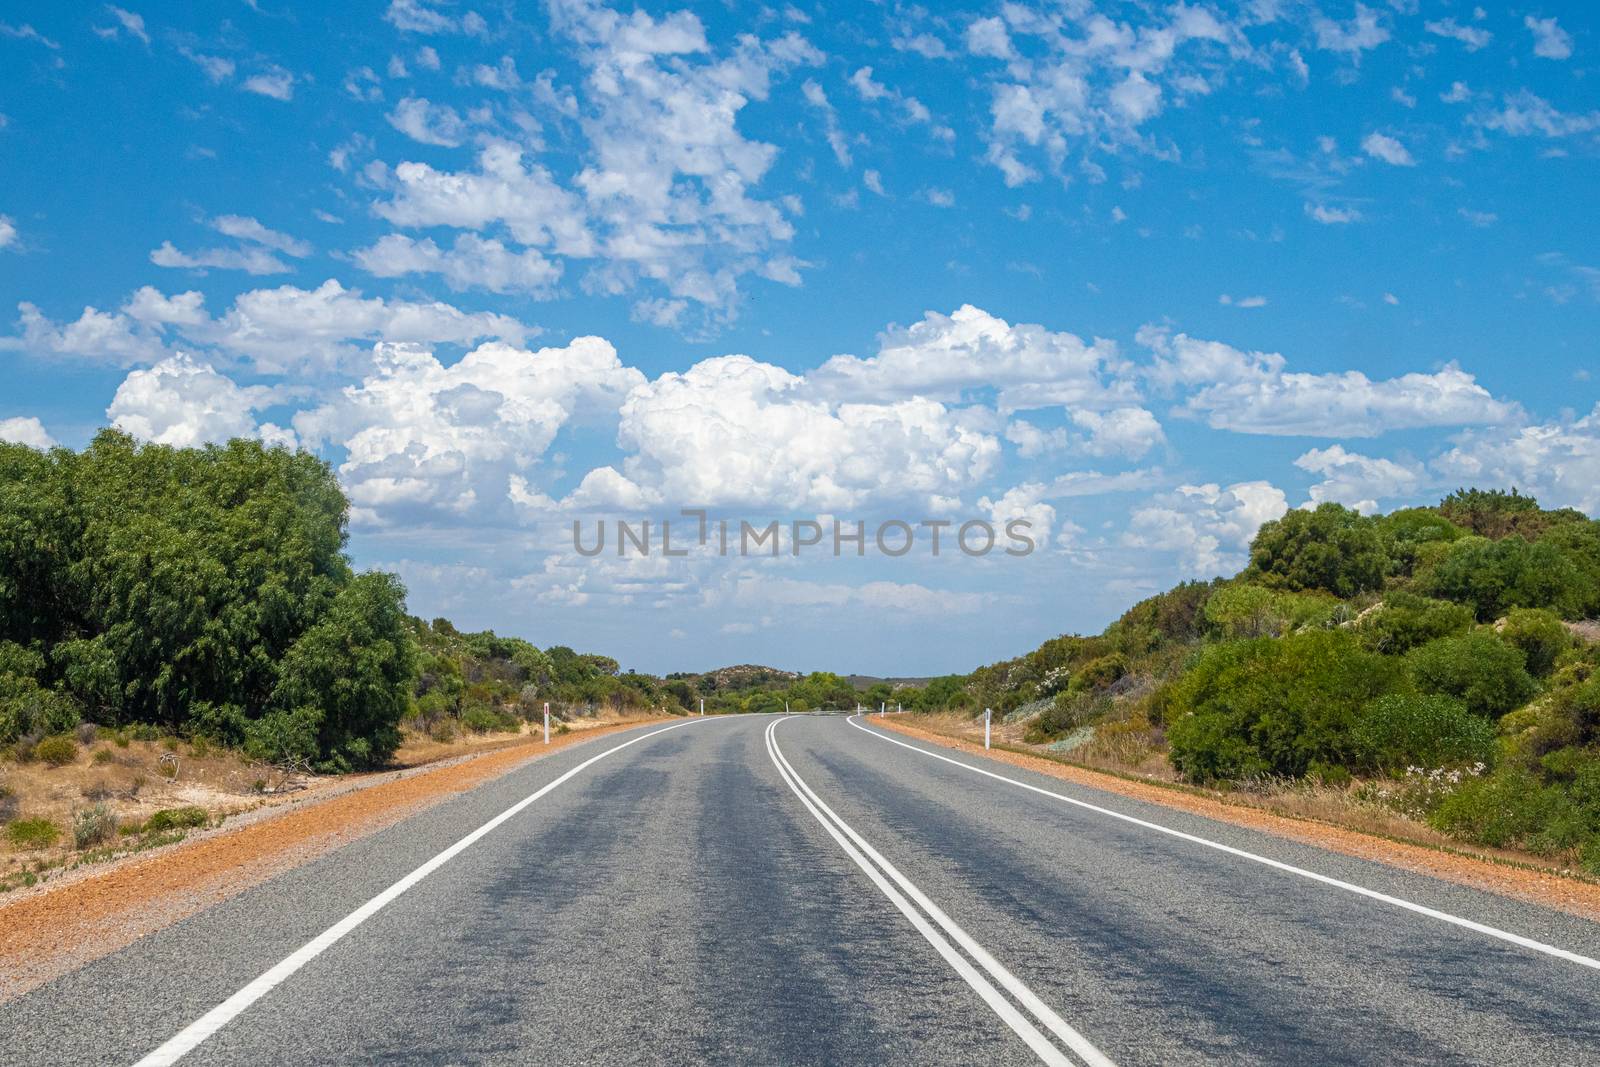 Empty road through green landscape in Australia storm clouds forming in sky